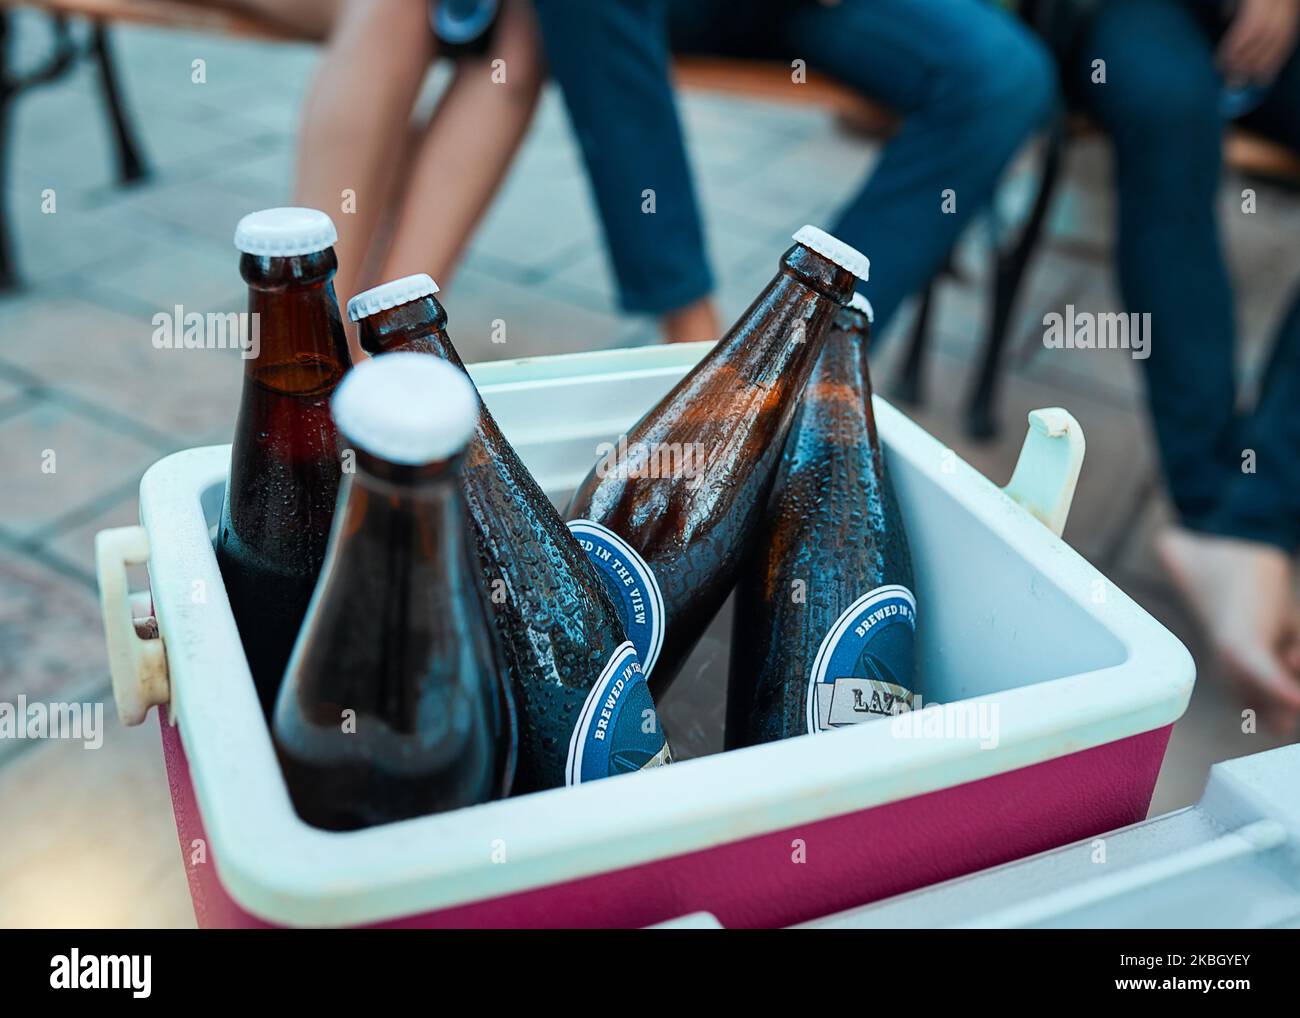 Ice cold beers all party long. bottled beers chilling in a cooler box at an outdoor gathering. Stock Photo